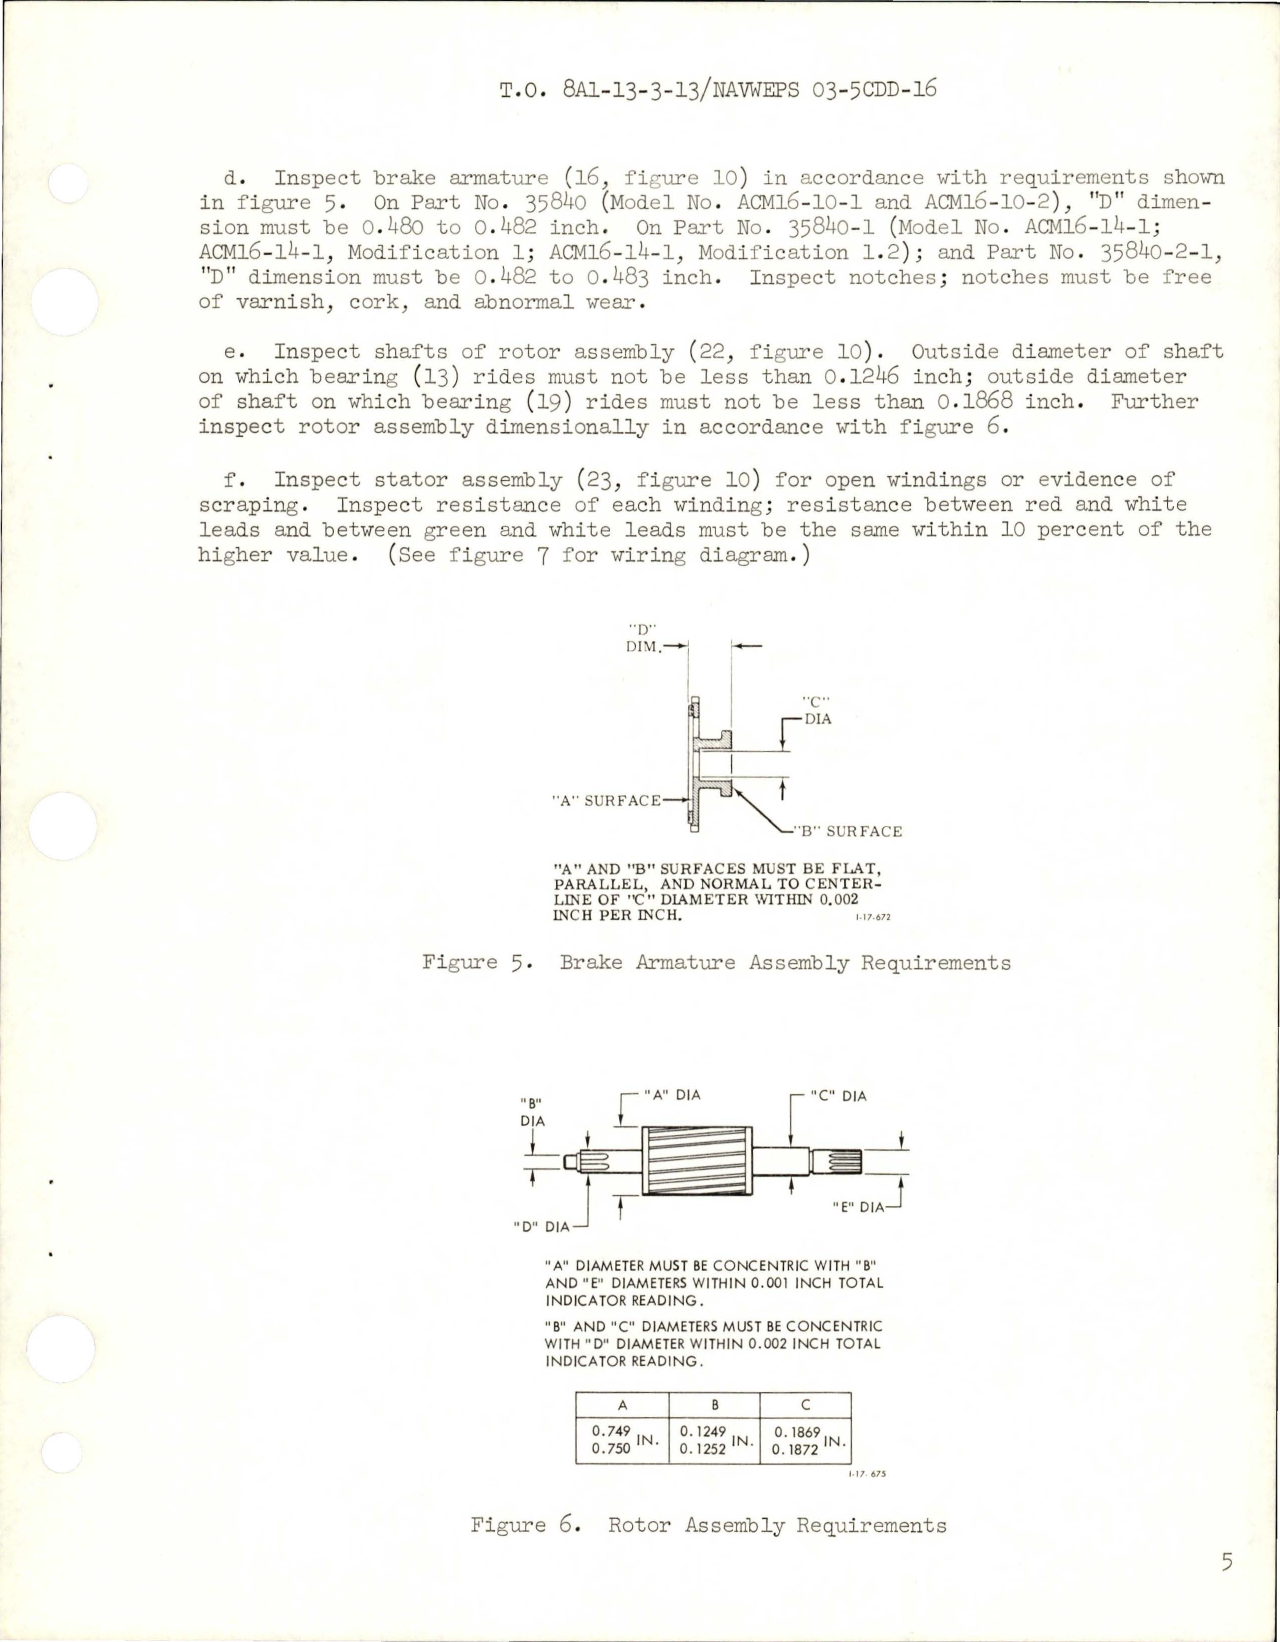 Sample page 5 from AirCorps Library document: Overhaul Instructions with Parts Breakdown for Alternating Current Motors - Parts 35840, 35840-1, and 35840-2-1